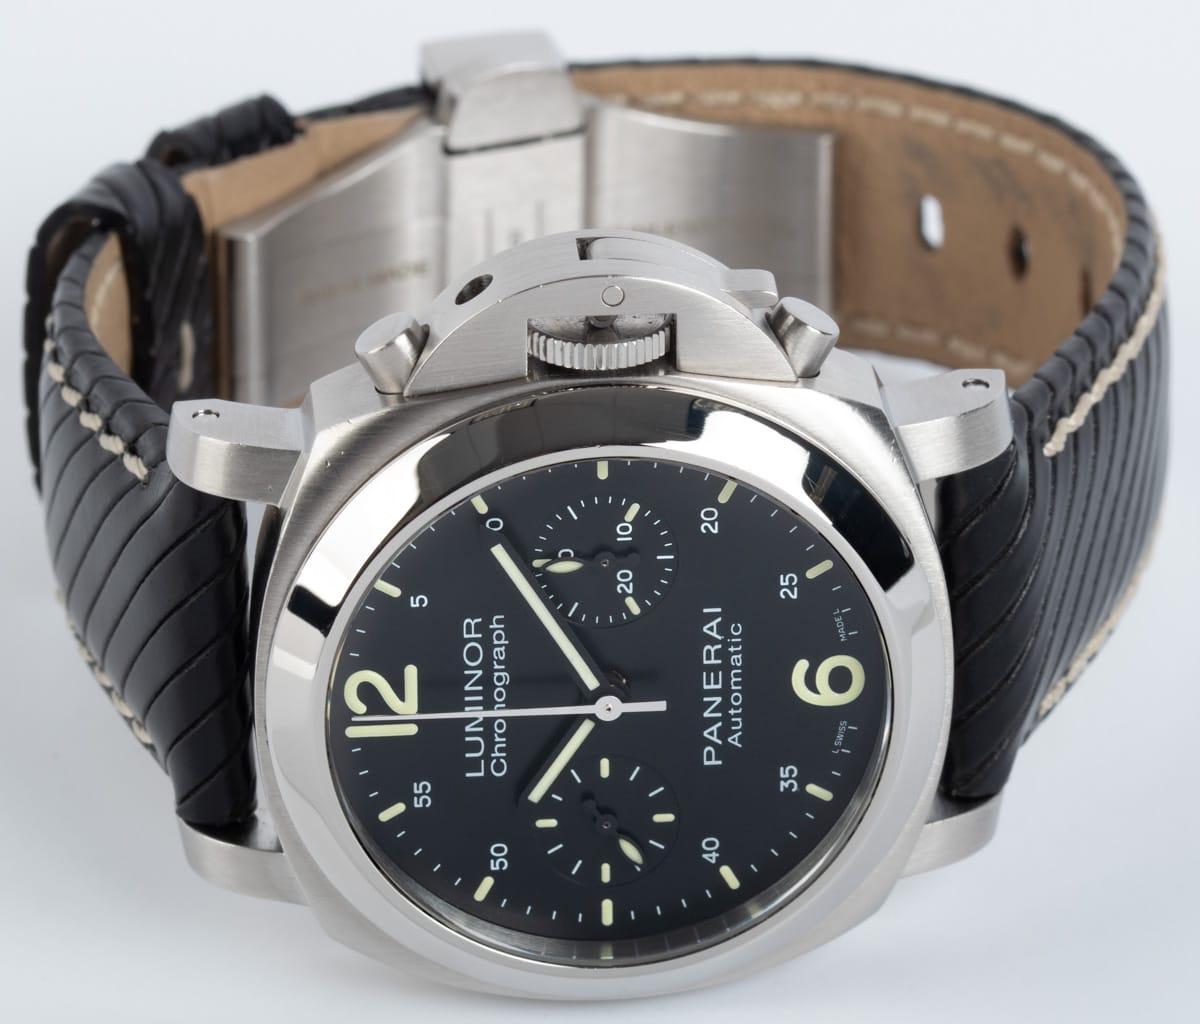 Front View of Luminor Chronograph